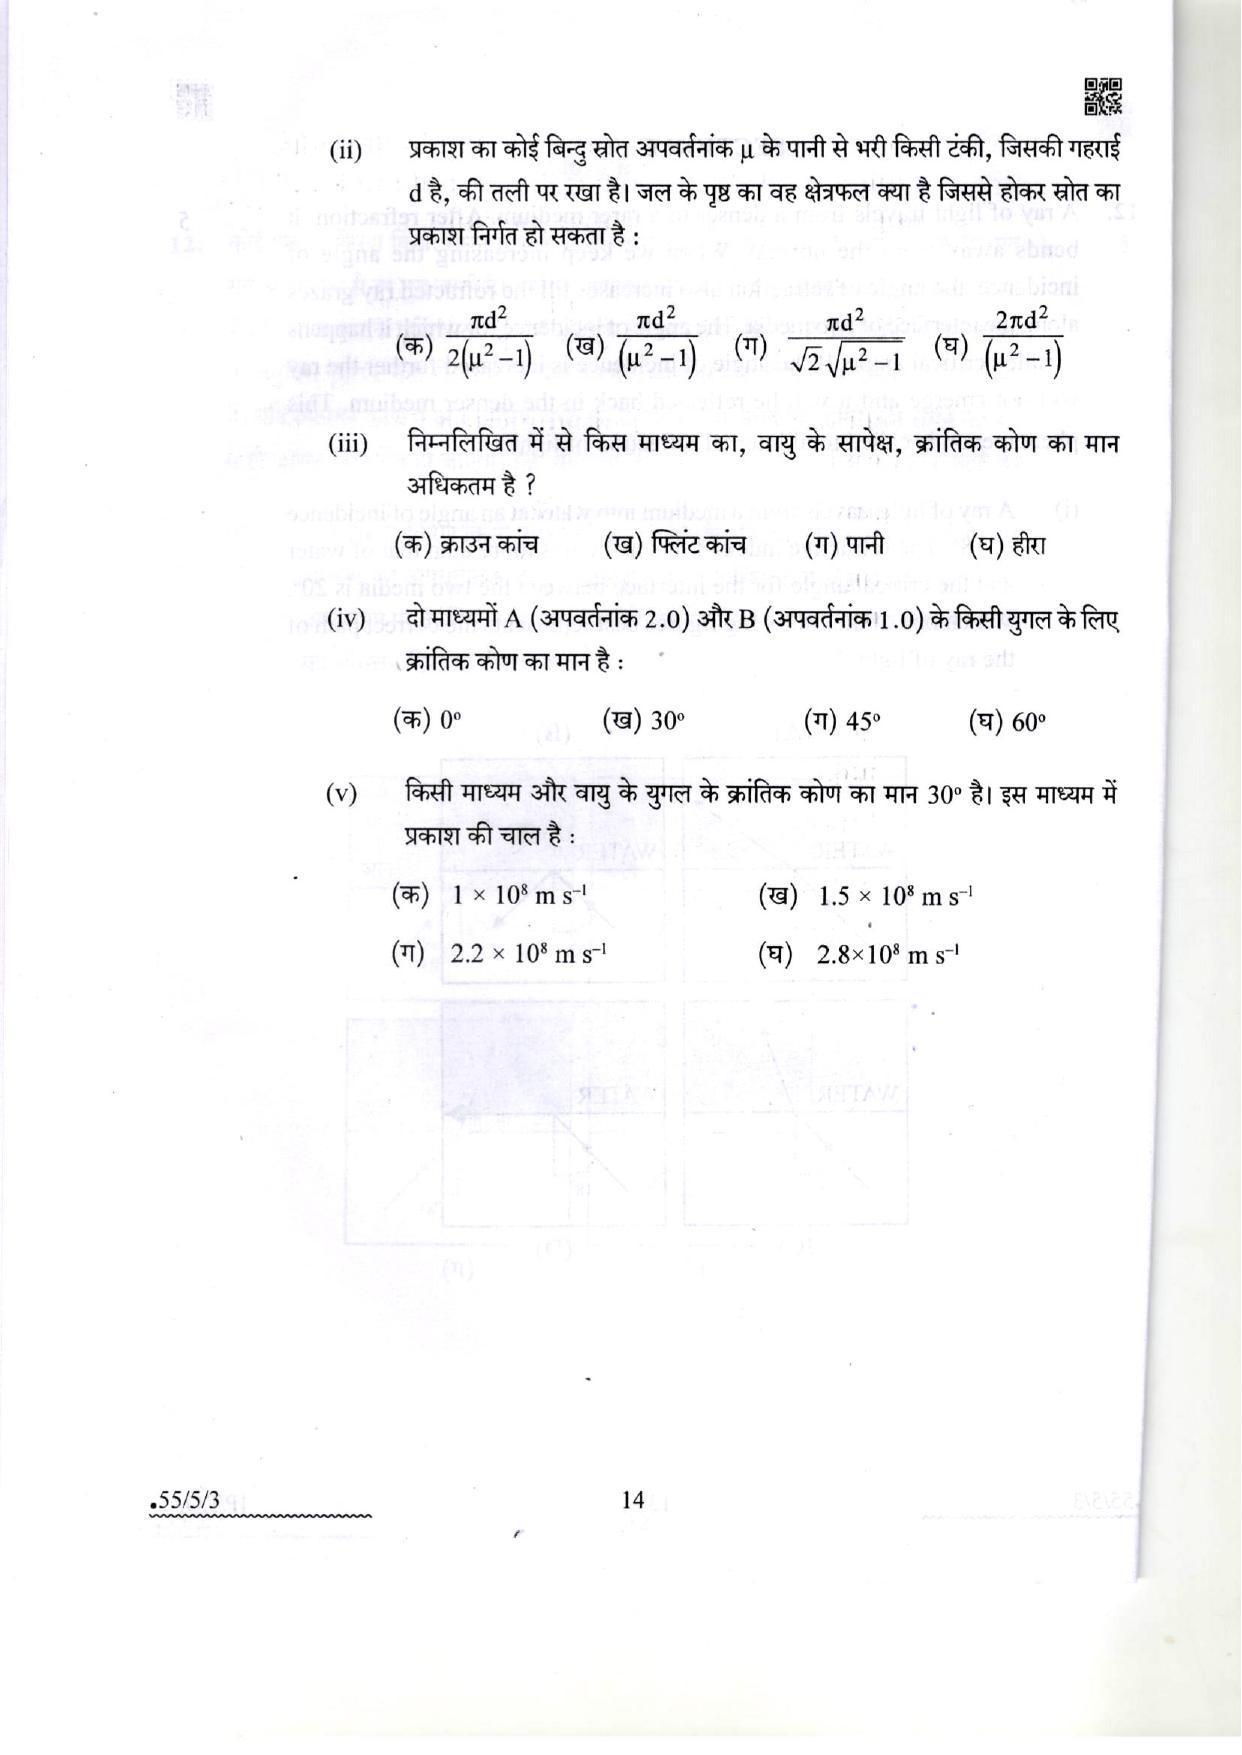 CBSE Class 12 55-5-3 Physics 2022 Question Paper - Page 14